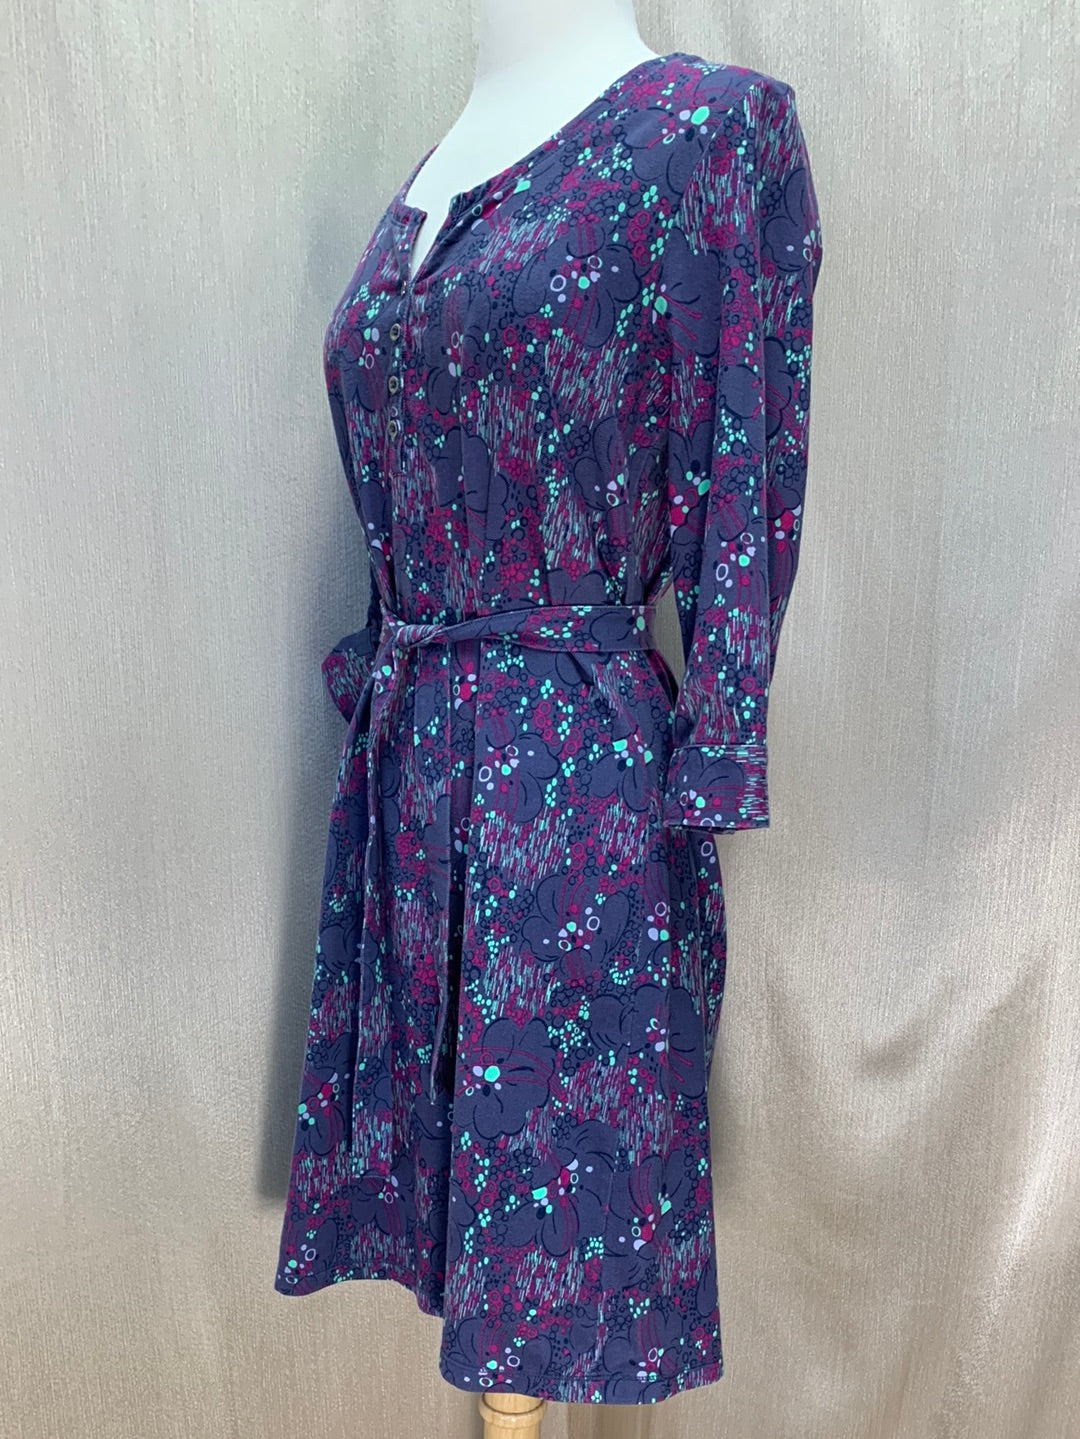 REI purple floral Henley Neck Belted 3/4 Tab Sleeve Casual Dress - M